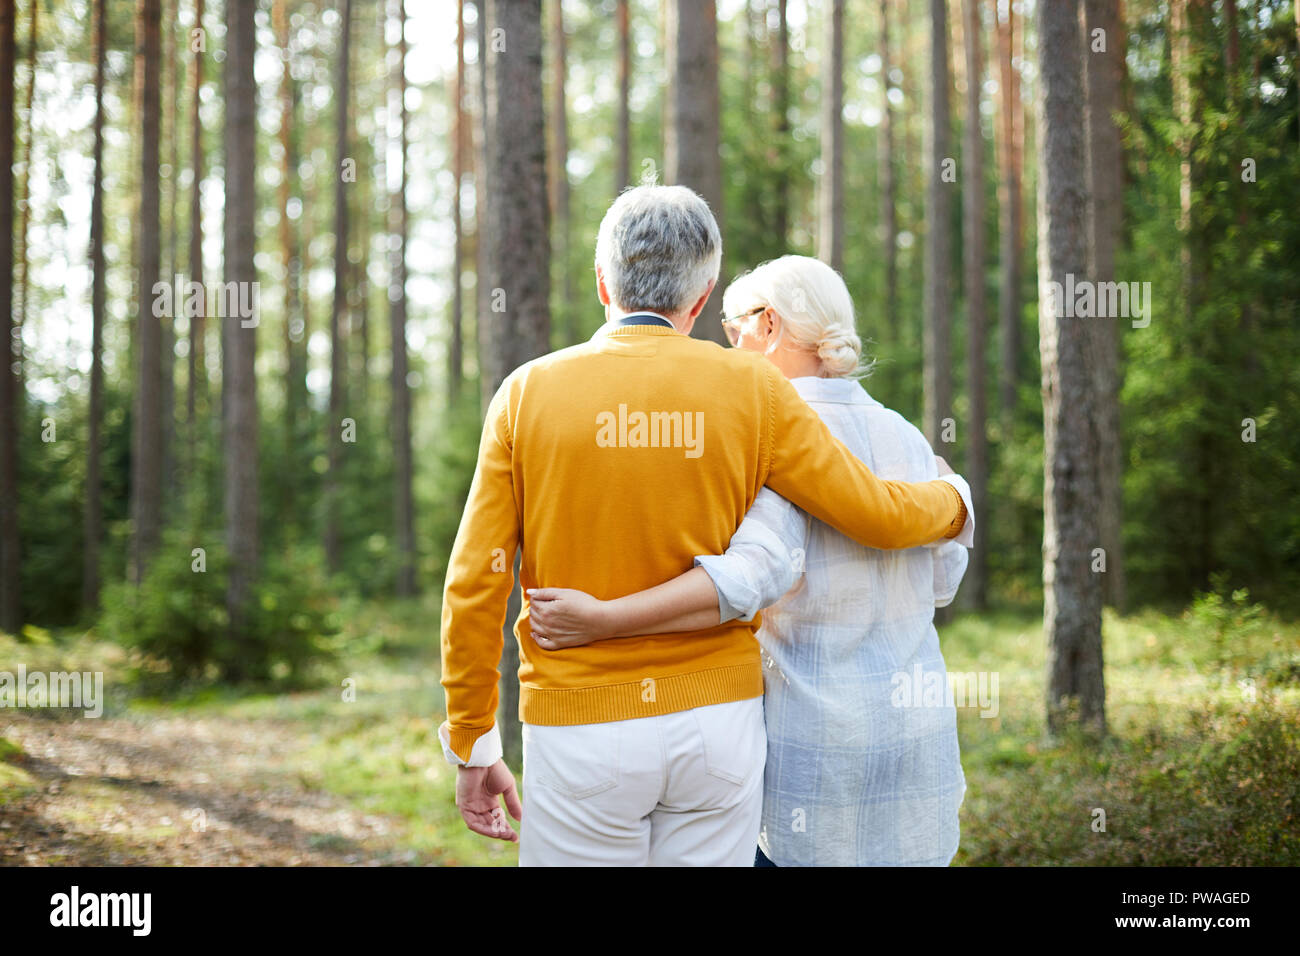 Rear view of senior casual restful couple taking walk in embrace in the forest Stock Photo